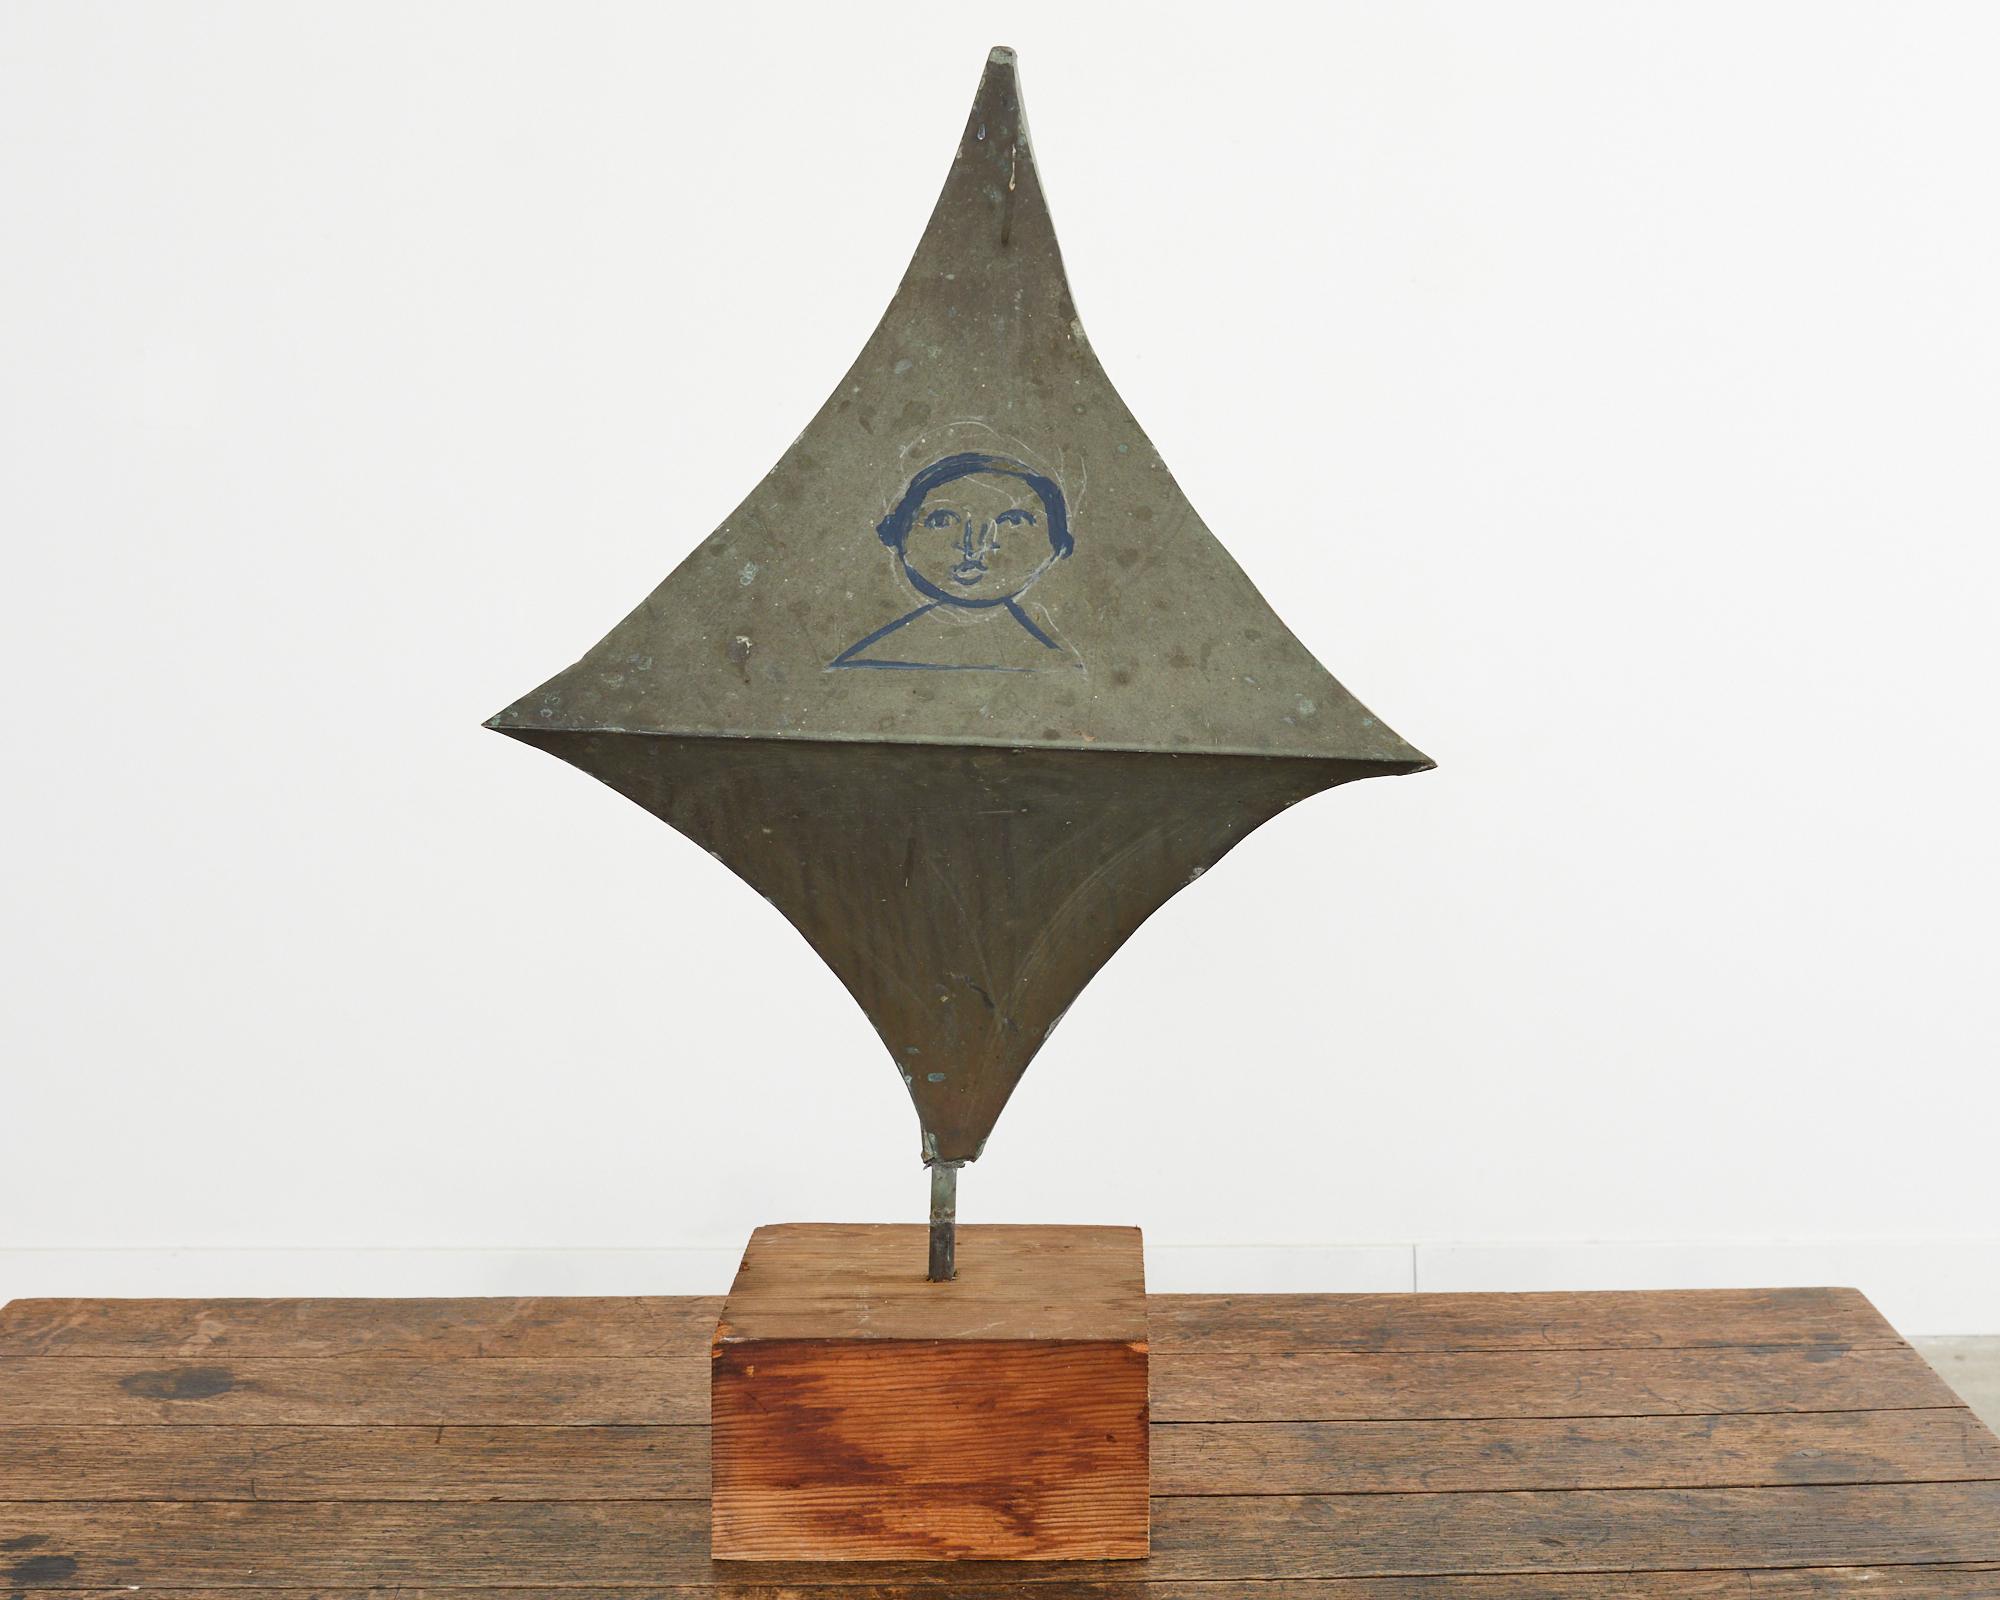 Fascinating objet d'art created and painted by artist Ira Yeager (American 1938-2022). Crafted from patinated zinc with an aged patina and verdigris. The four-sided diamond shape is mounted to a wooden square pine plinth. Each side has a painted